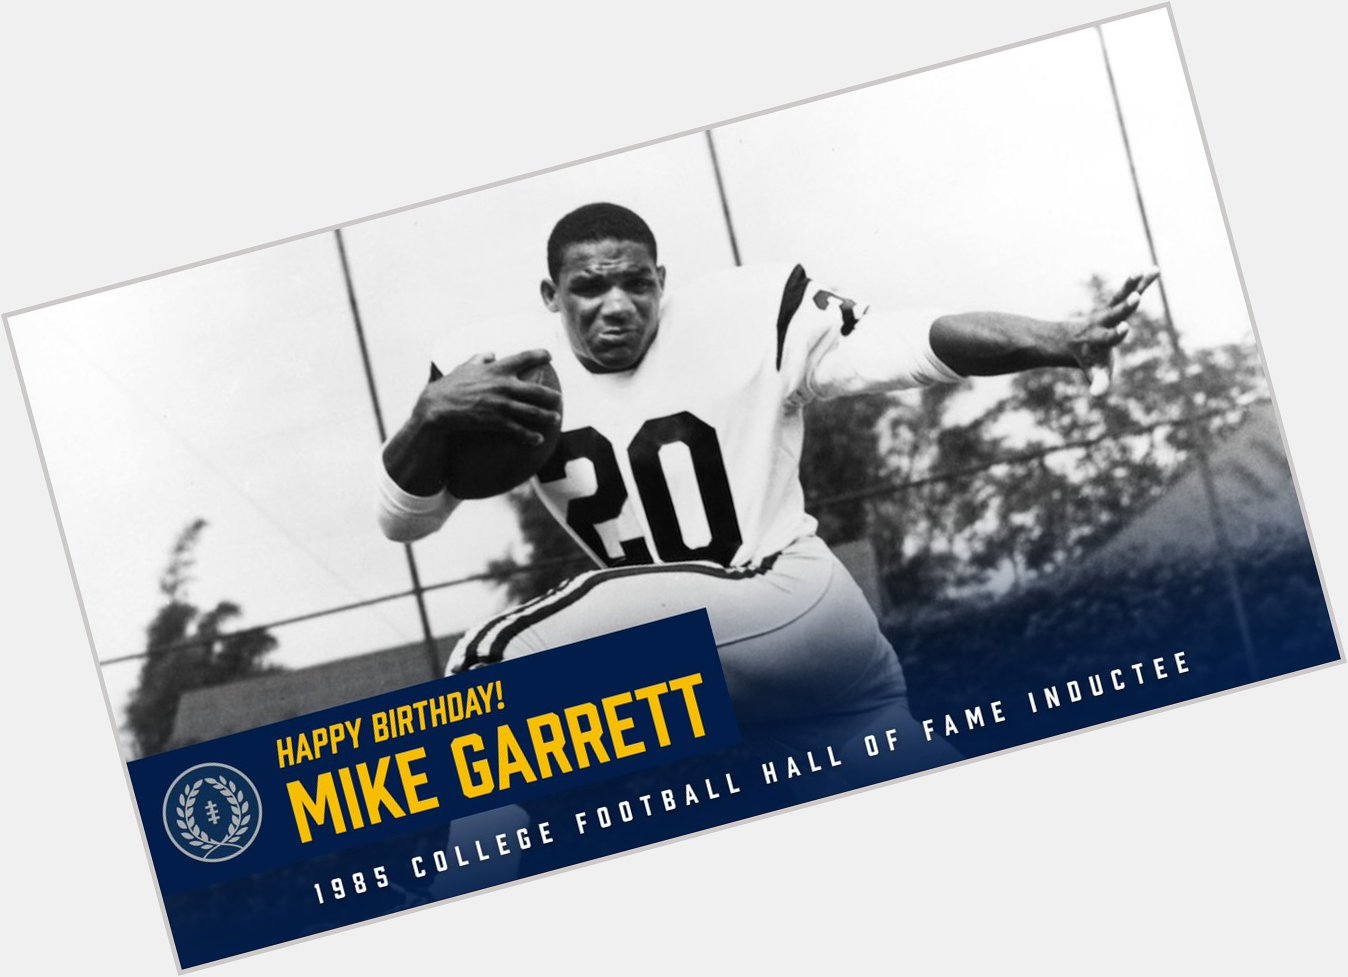 Happy Birthday to 1985 inductee Mike Garrett!

The former RB won the in 1965 